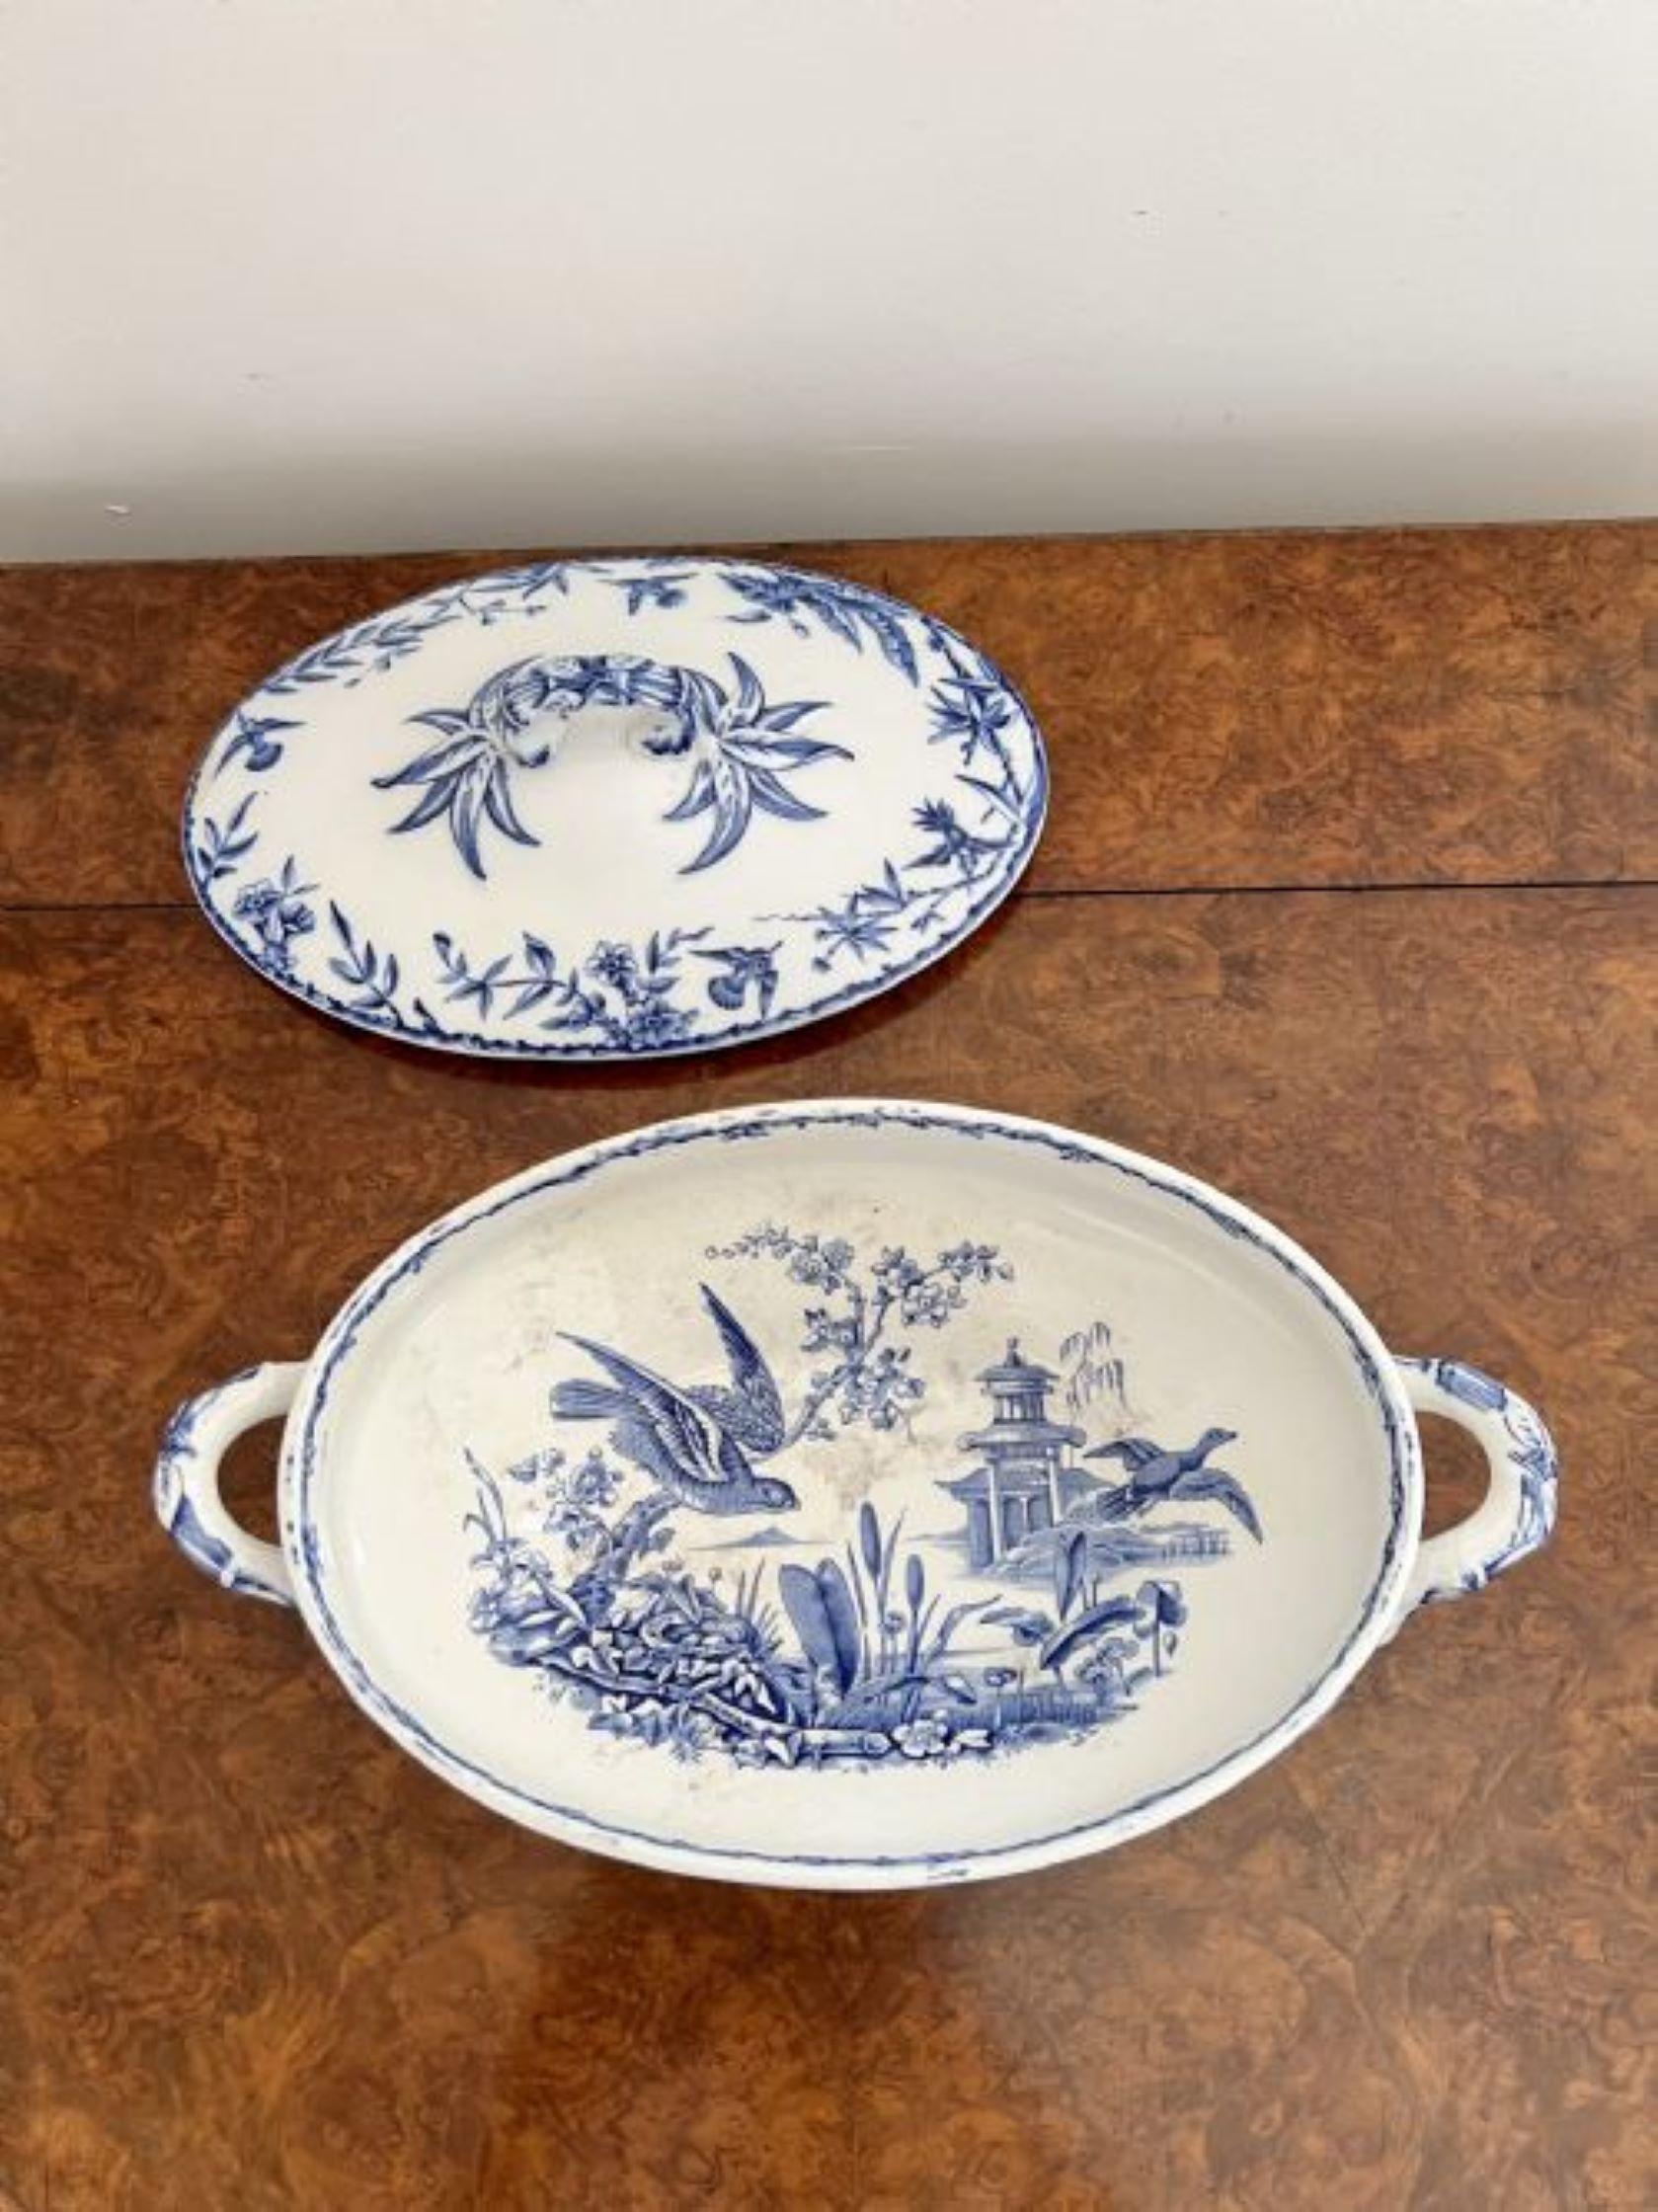 Stunning quality antique victorian tureen by Ridgways R.S.R, having a stunning quality blue and white tureen by Ridgways fantastically decorated with flowers, birds, nests and trees, wonderful decoration inside the tureen with a shaped handle to the